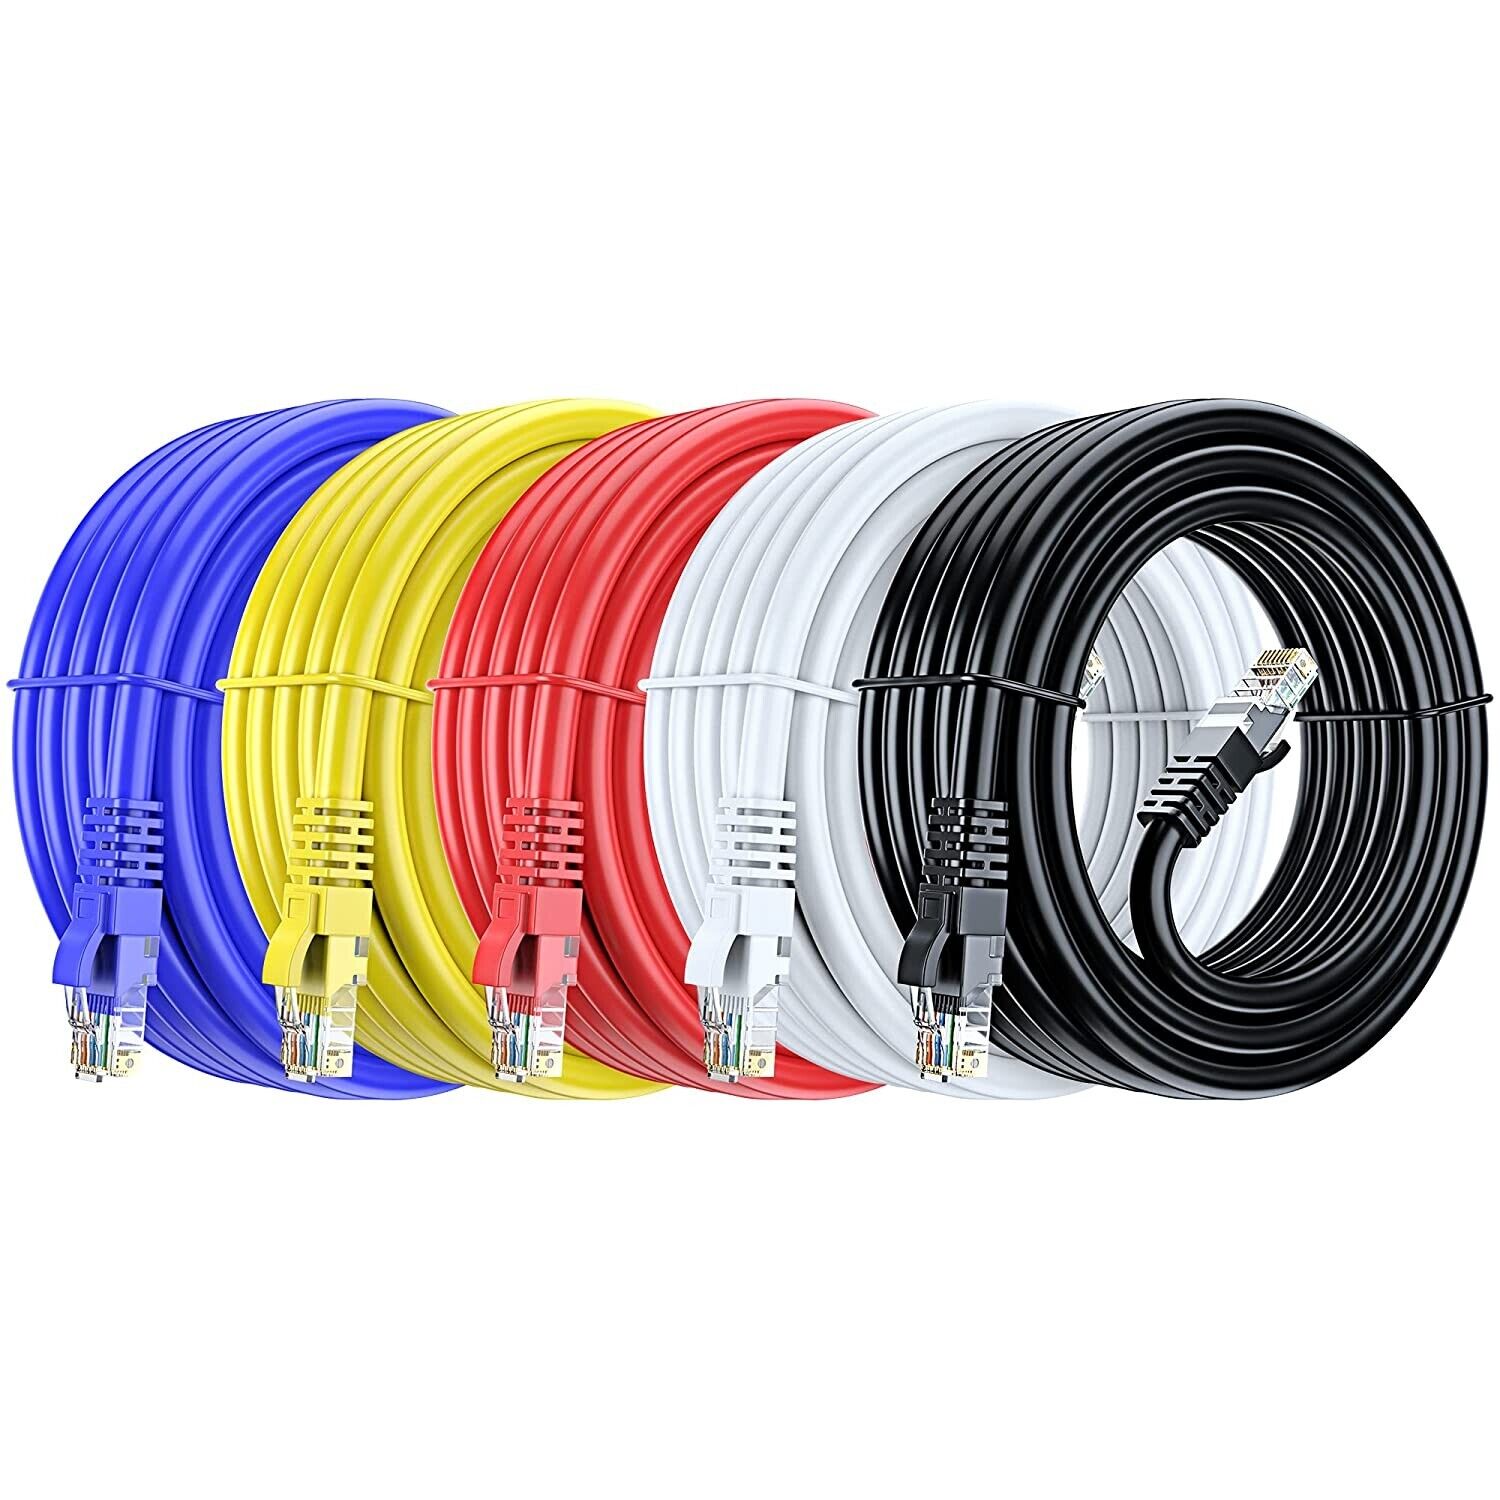 Maximm Cat 6 Ethernet Cable 12 Ft, 100% Pure Copper, Cat6 Cable 5 Pack LAN Cab